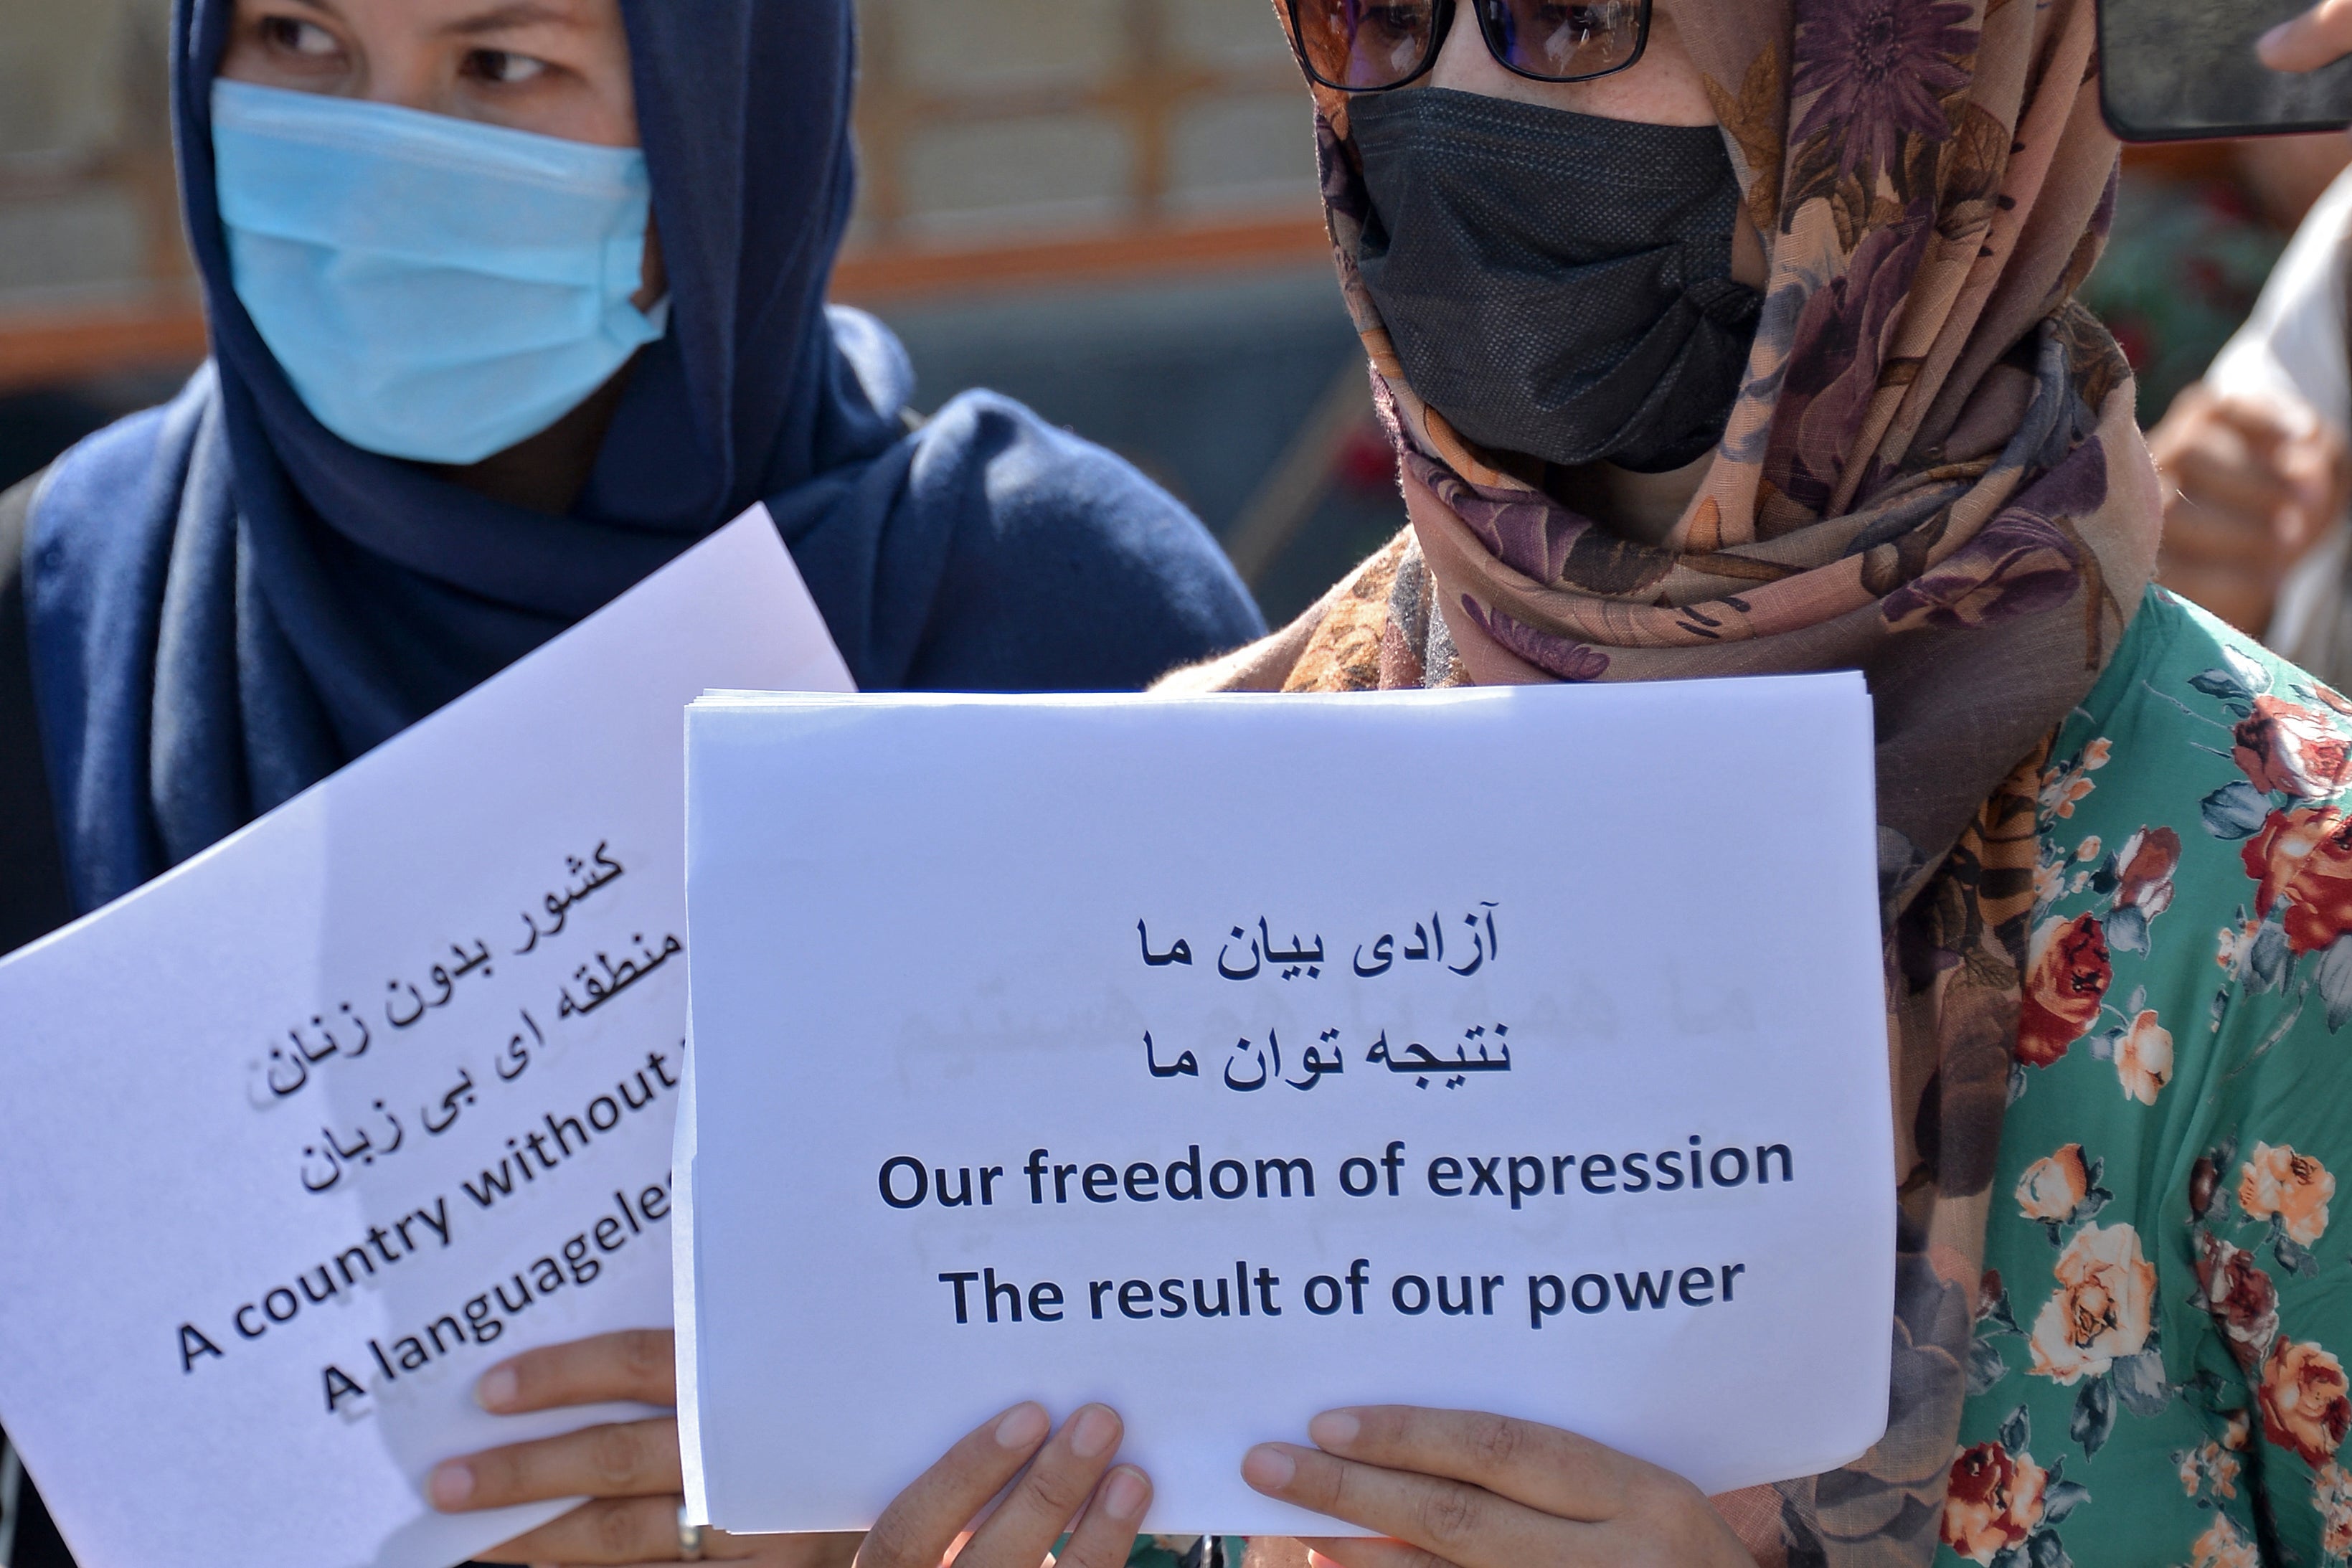 Afghan women take part in a protest march for their rights under the Taliban rule in the downtown area of Kabul on 3 September 2021